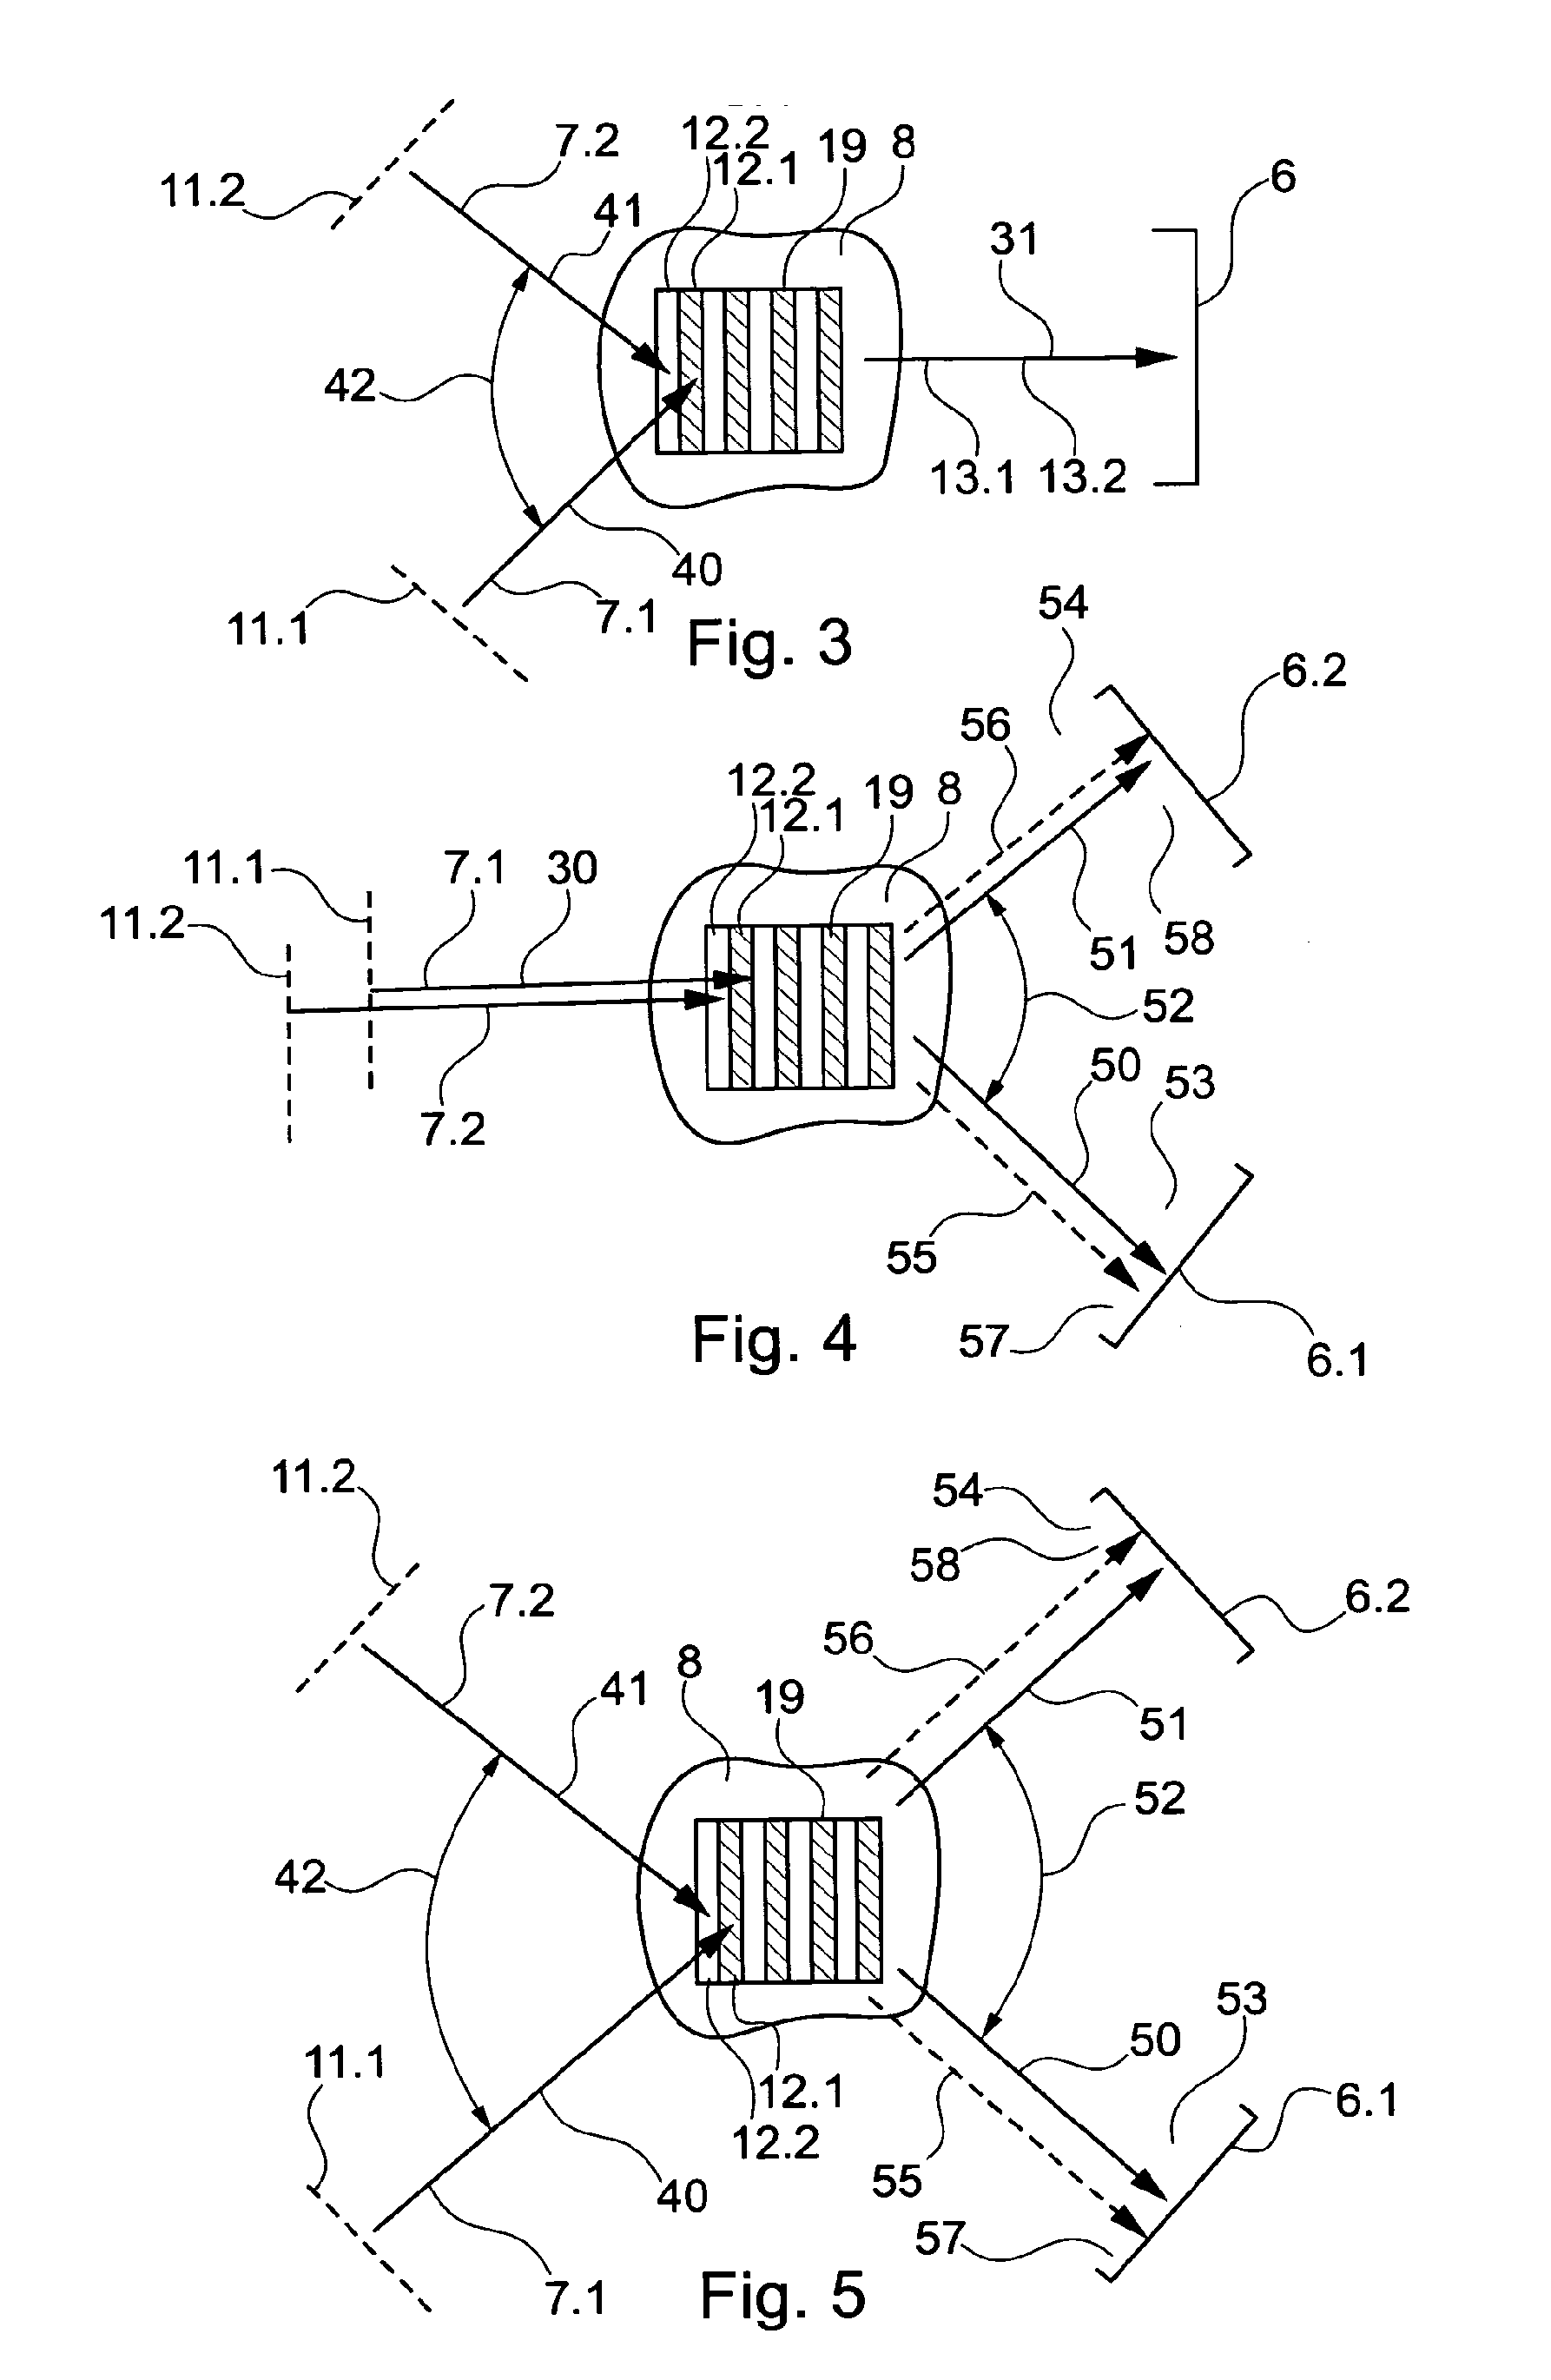 Method for optical measurement of objects using a triangulation method